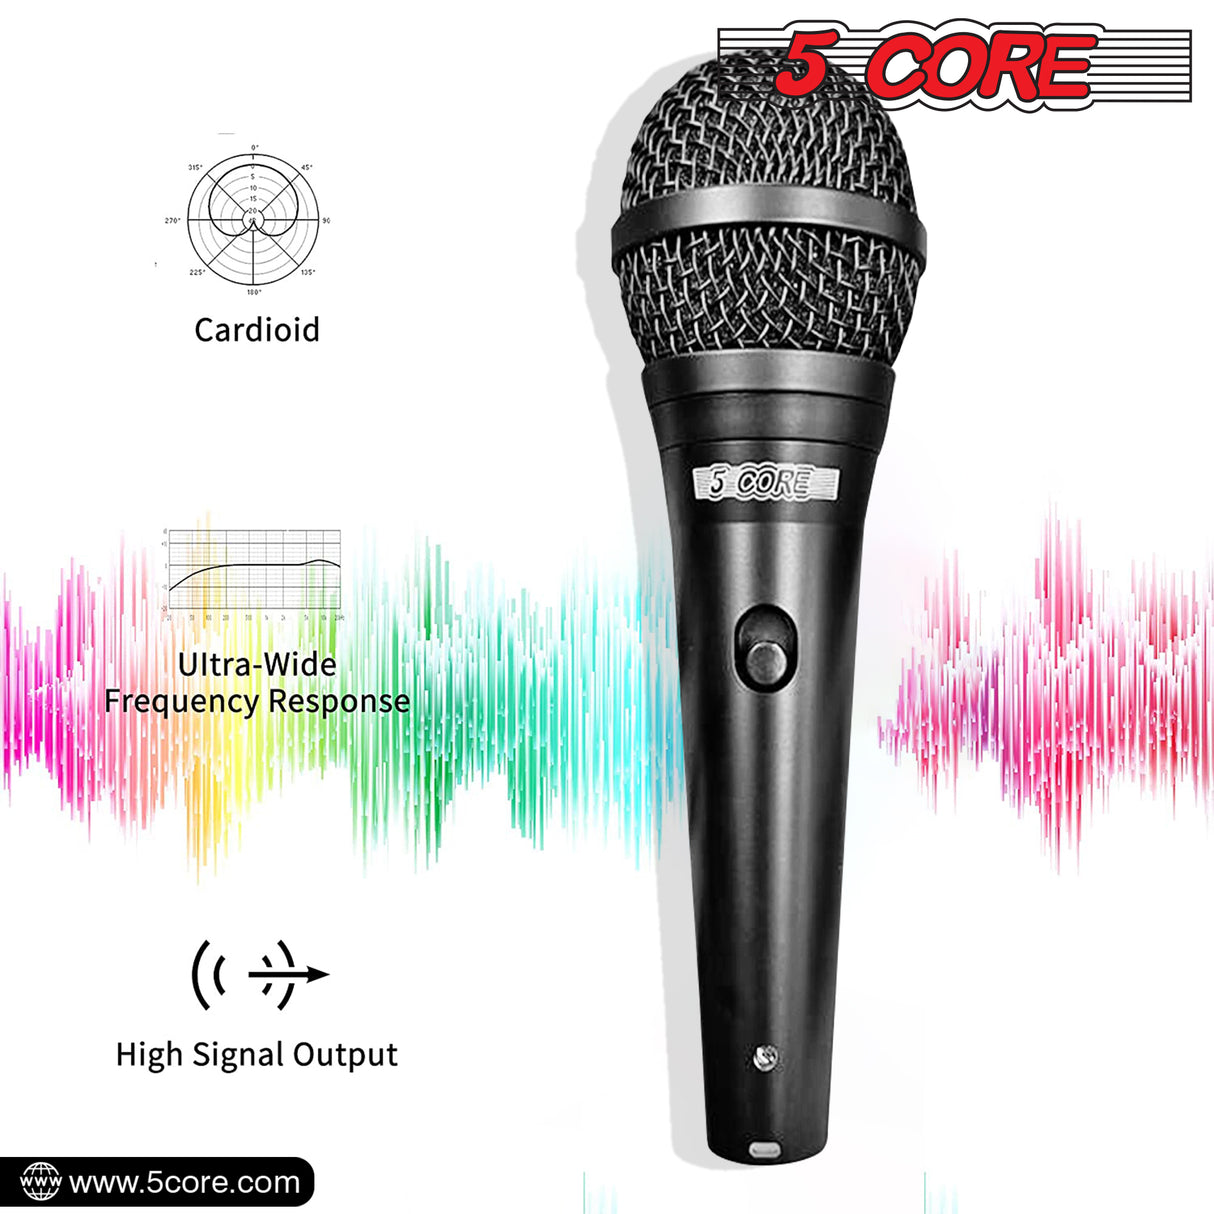 5 Core Foldable Tripod Mic Stand + Premium Vocal Dynamic Cardioid Mic Combo: Adjustable height, telescoping boom arm, secure tension lock. Includes 16ft XLR cable, mic clip, on/off switch. Ideal for karaoke MS 080 +ND58